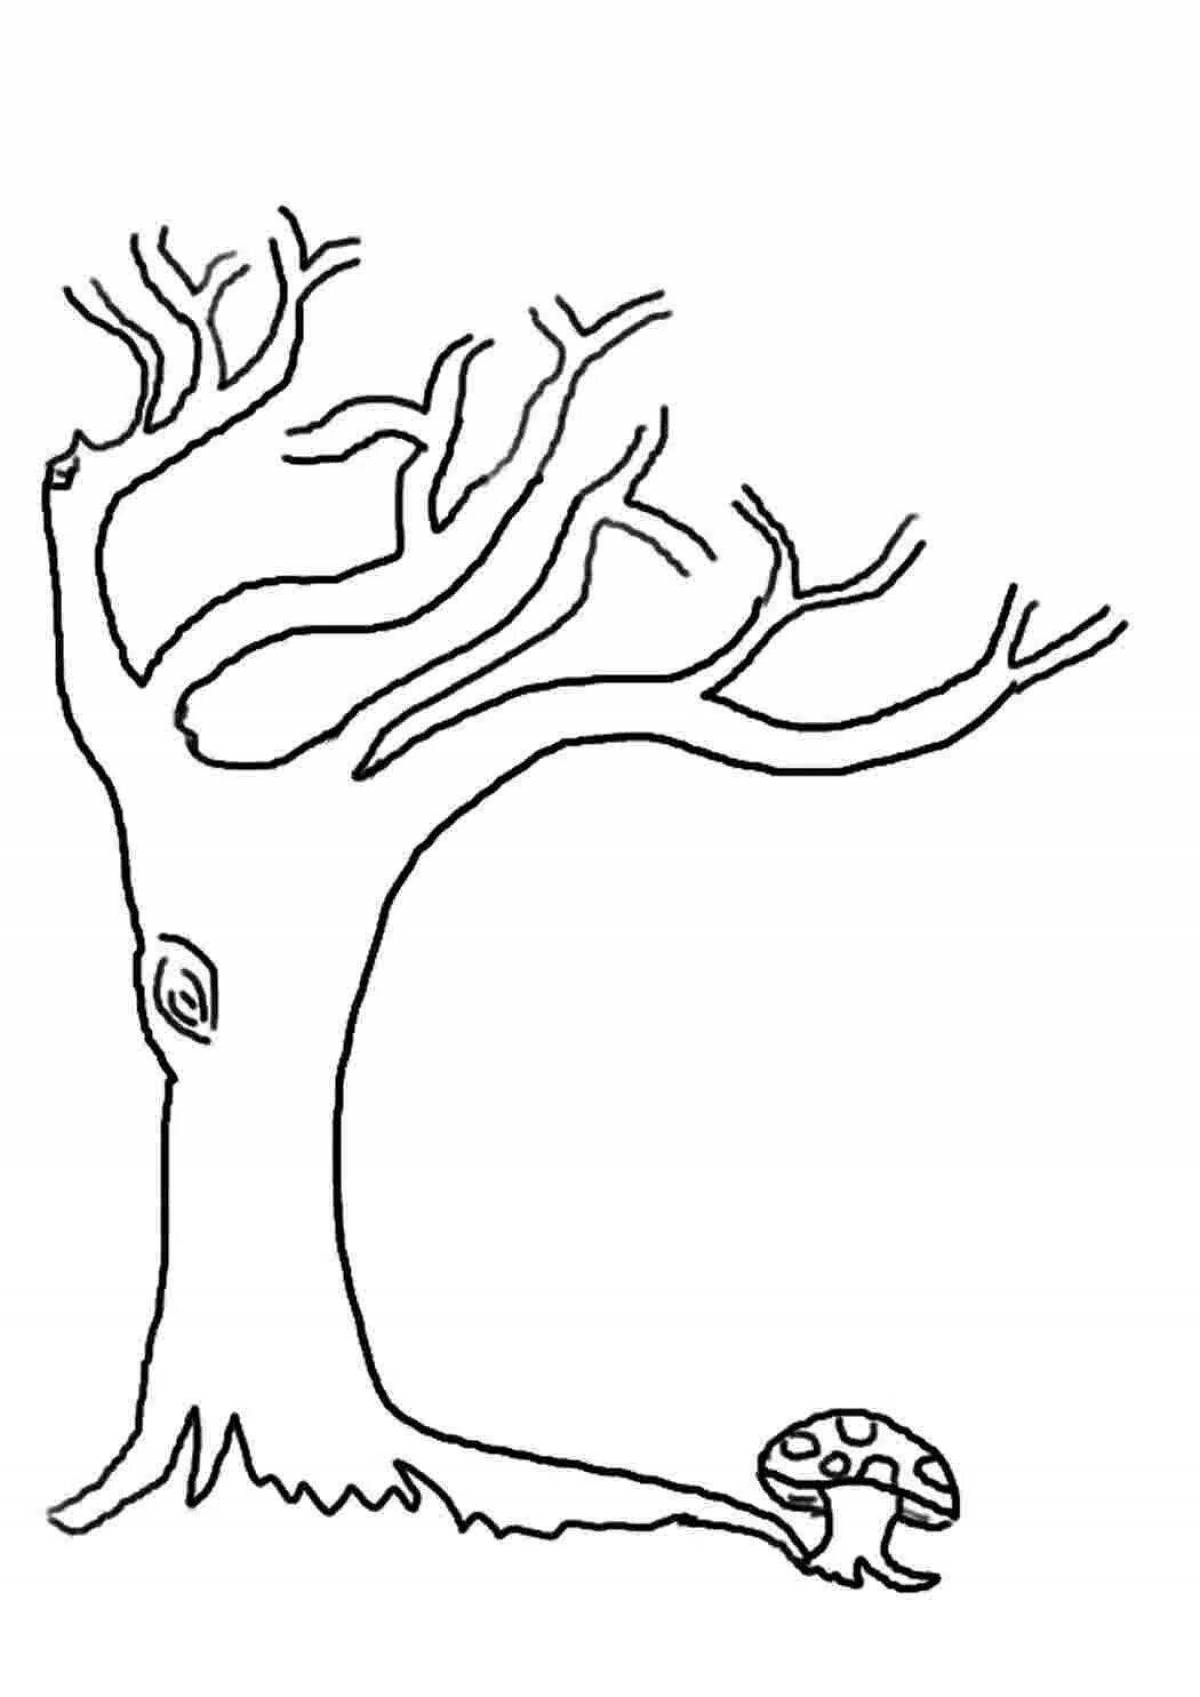 Coloring page of intricate tree pattern